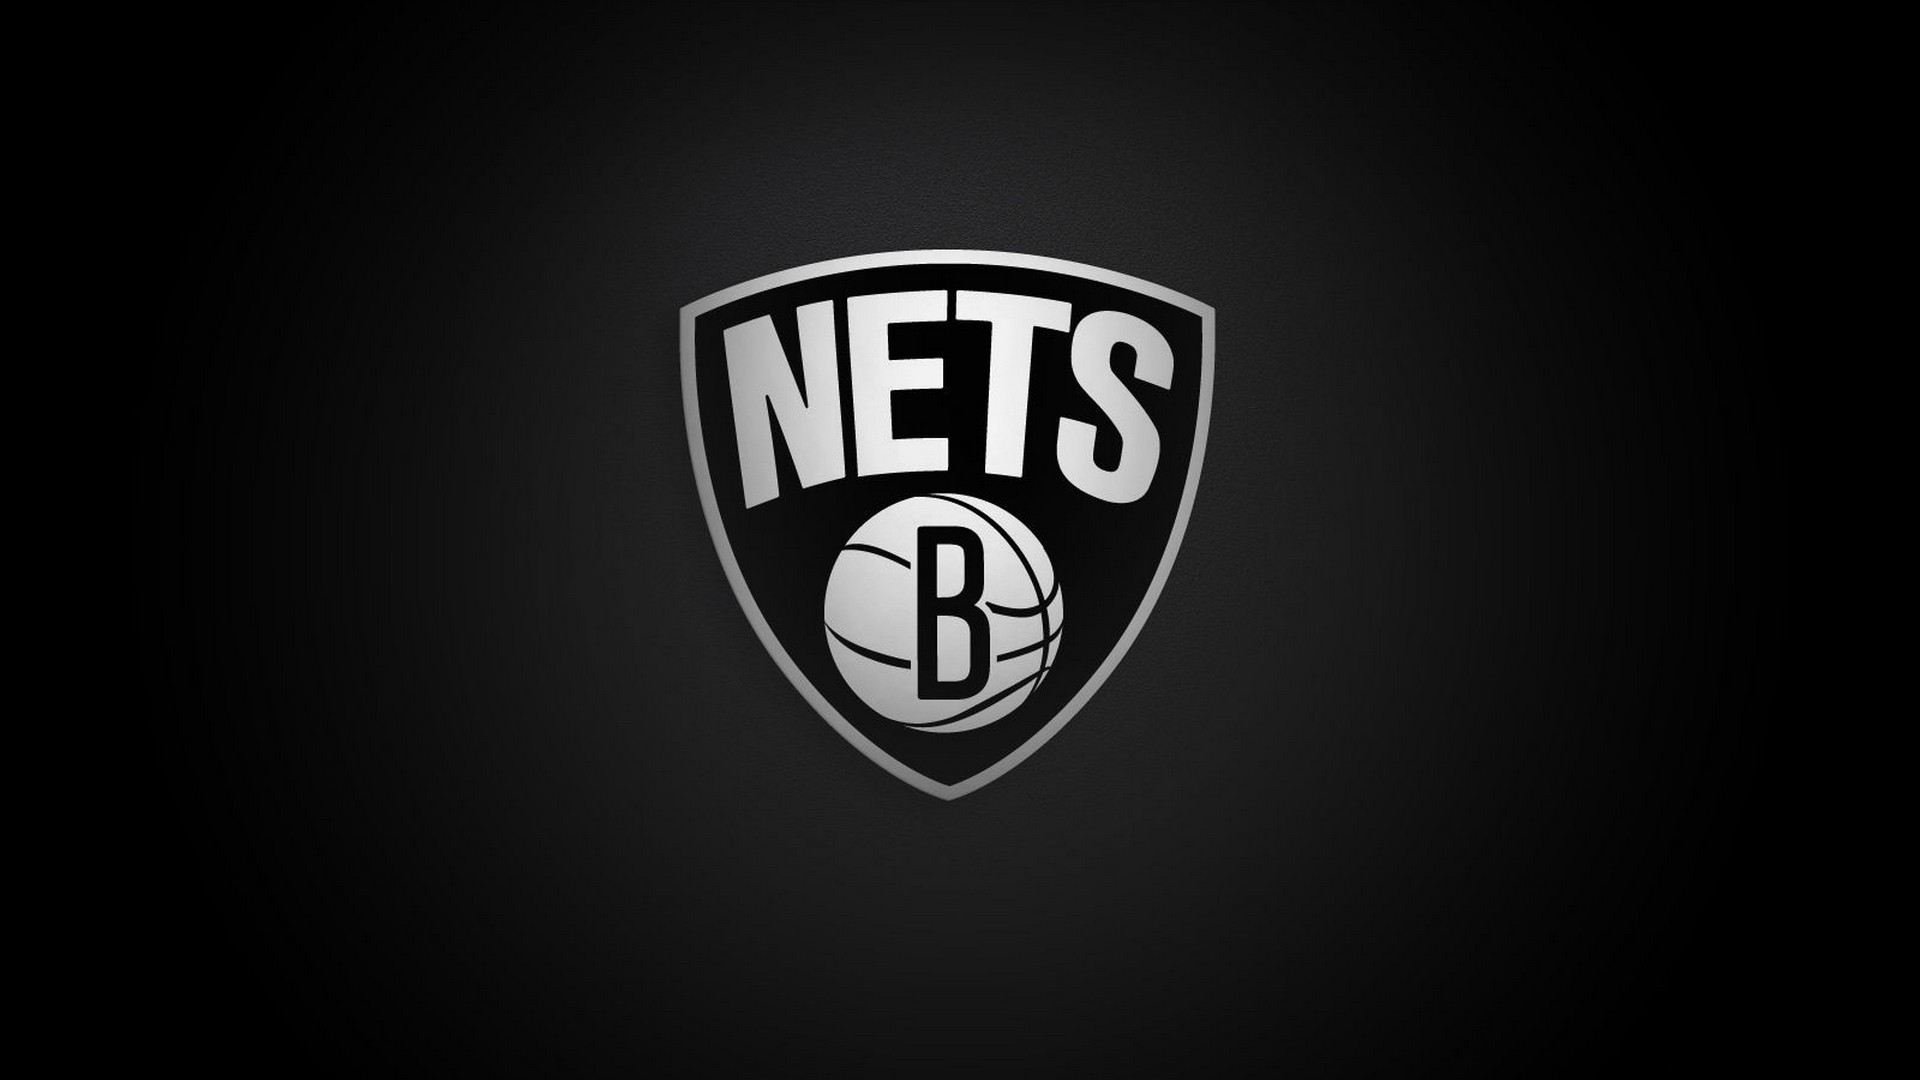 Brooklyn Nets Backgrounds HD with image dimensions 1920x1080 pixel. You can make this wallpaper for your Desktop Computer Backgrounds, Windows or Mac Screensavers, iPhone Lock screen, Tablet or Android and another Mobile Phone device